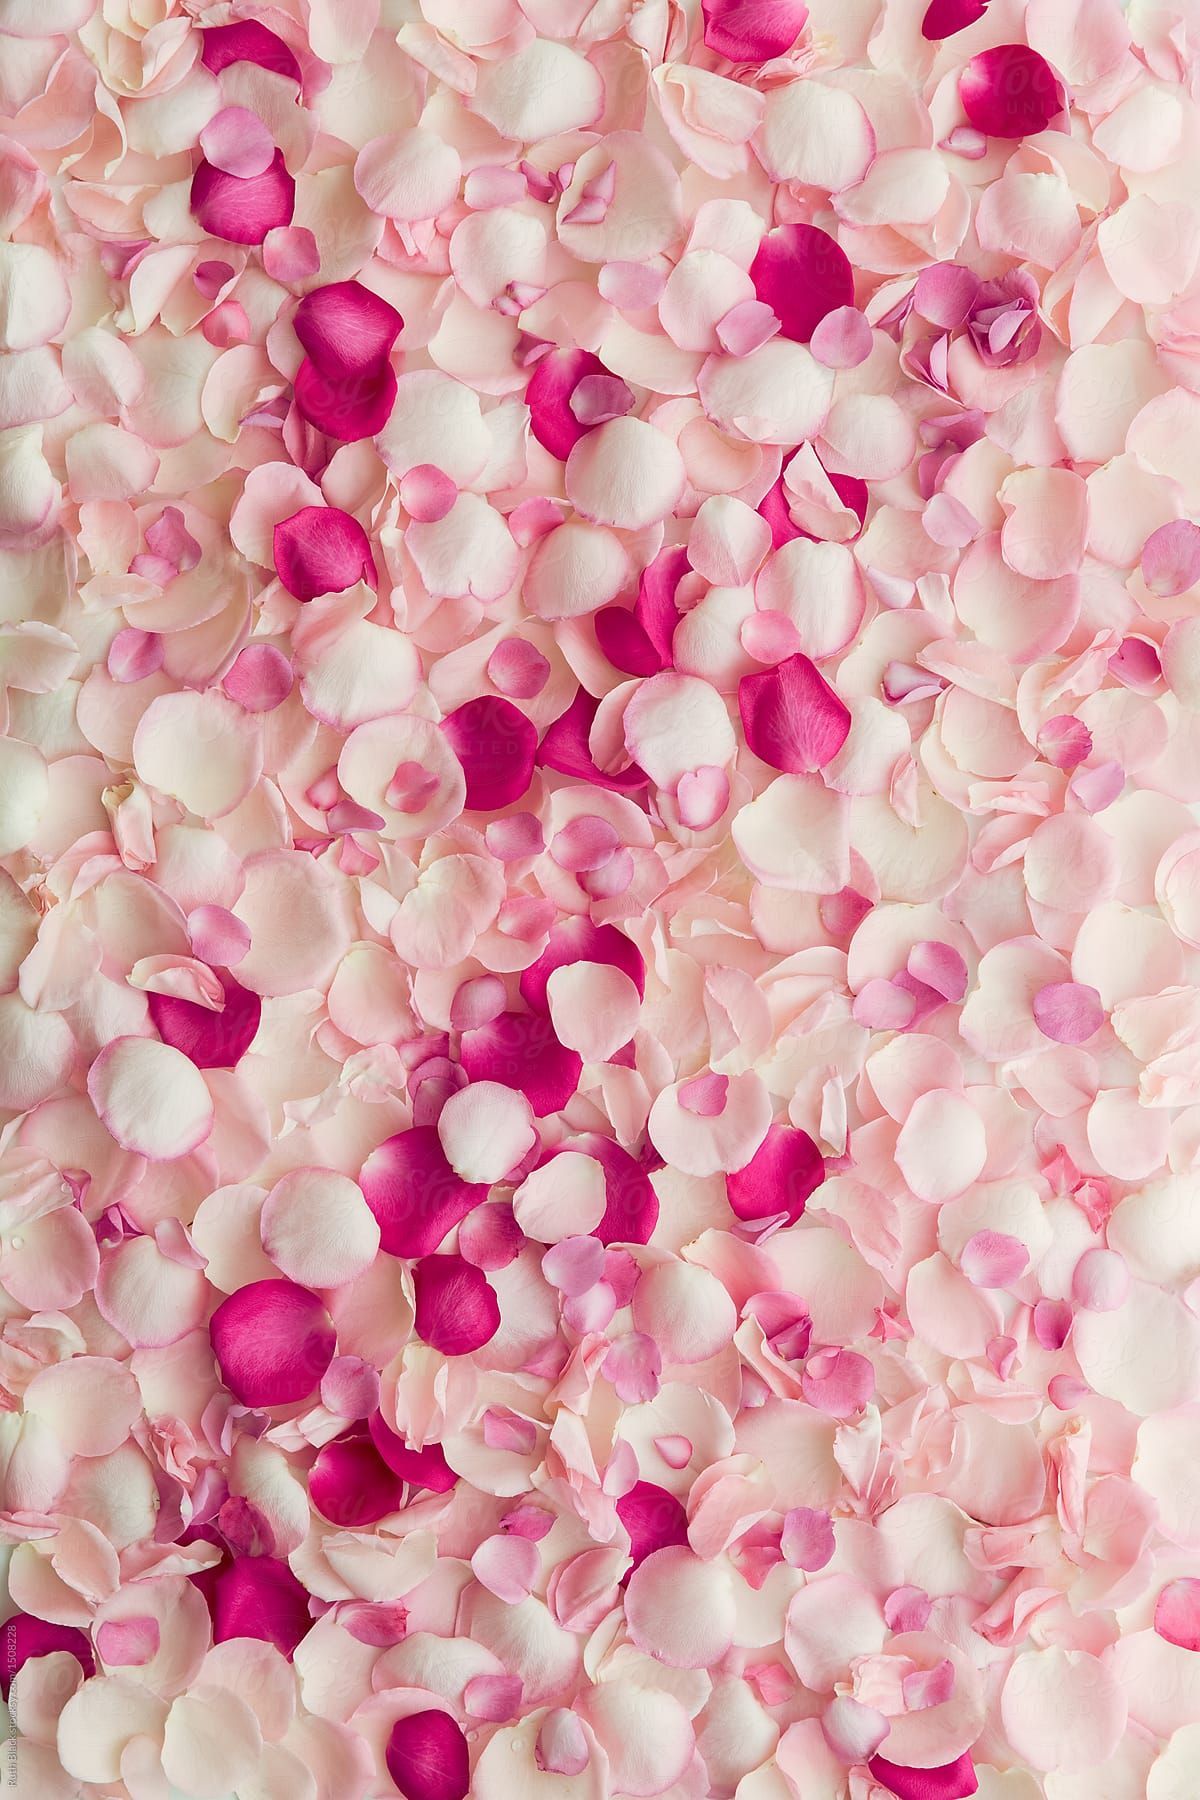 Rose Petal Background Download This High Resolution By Ruth Black From Stocksy United. IPhone Wallpaper Quotes Girly, Pink Wallpaper, Flower Wallpaper